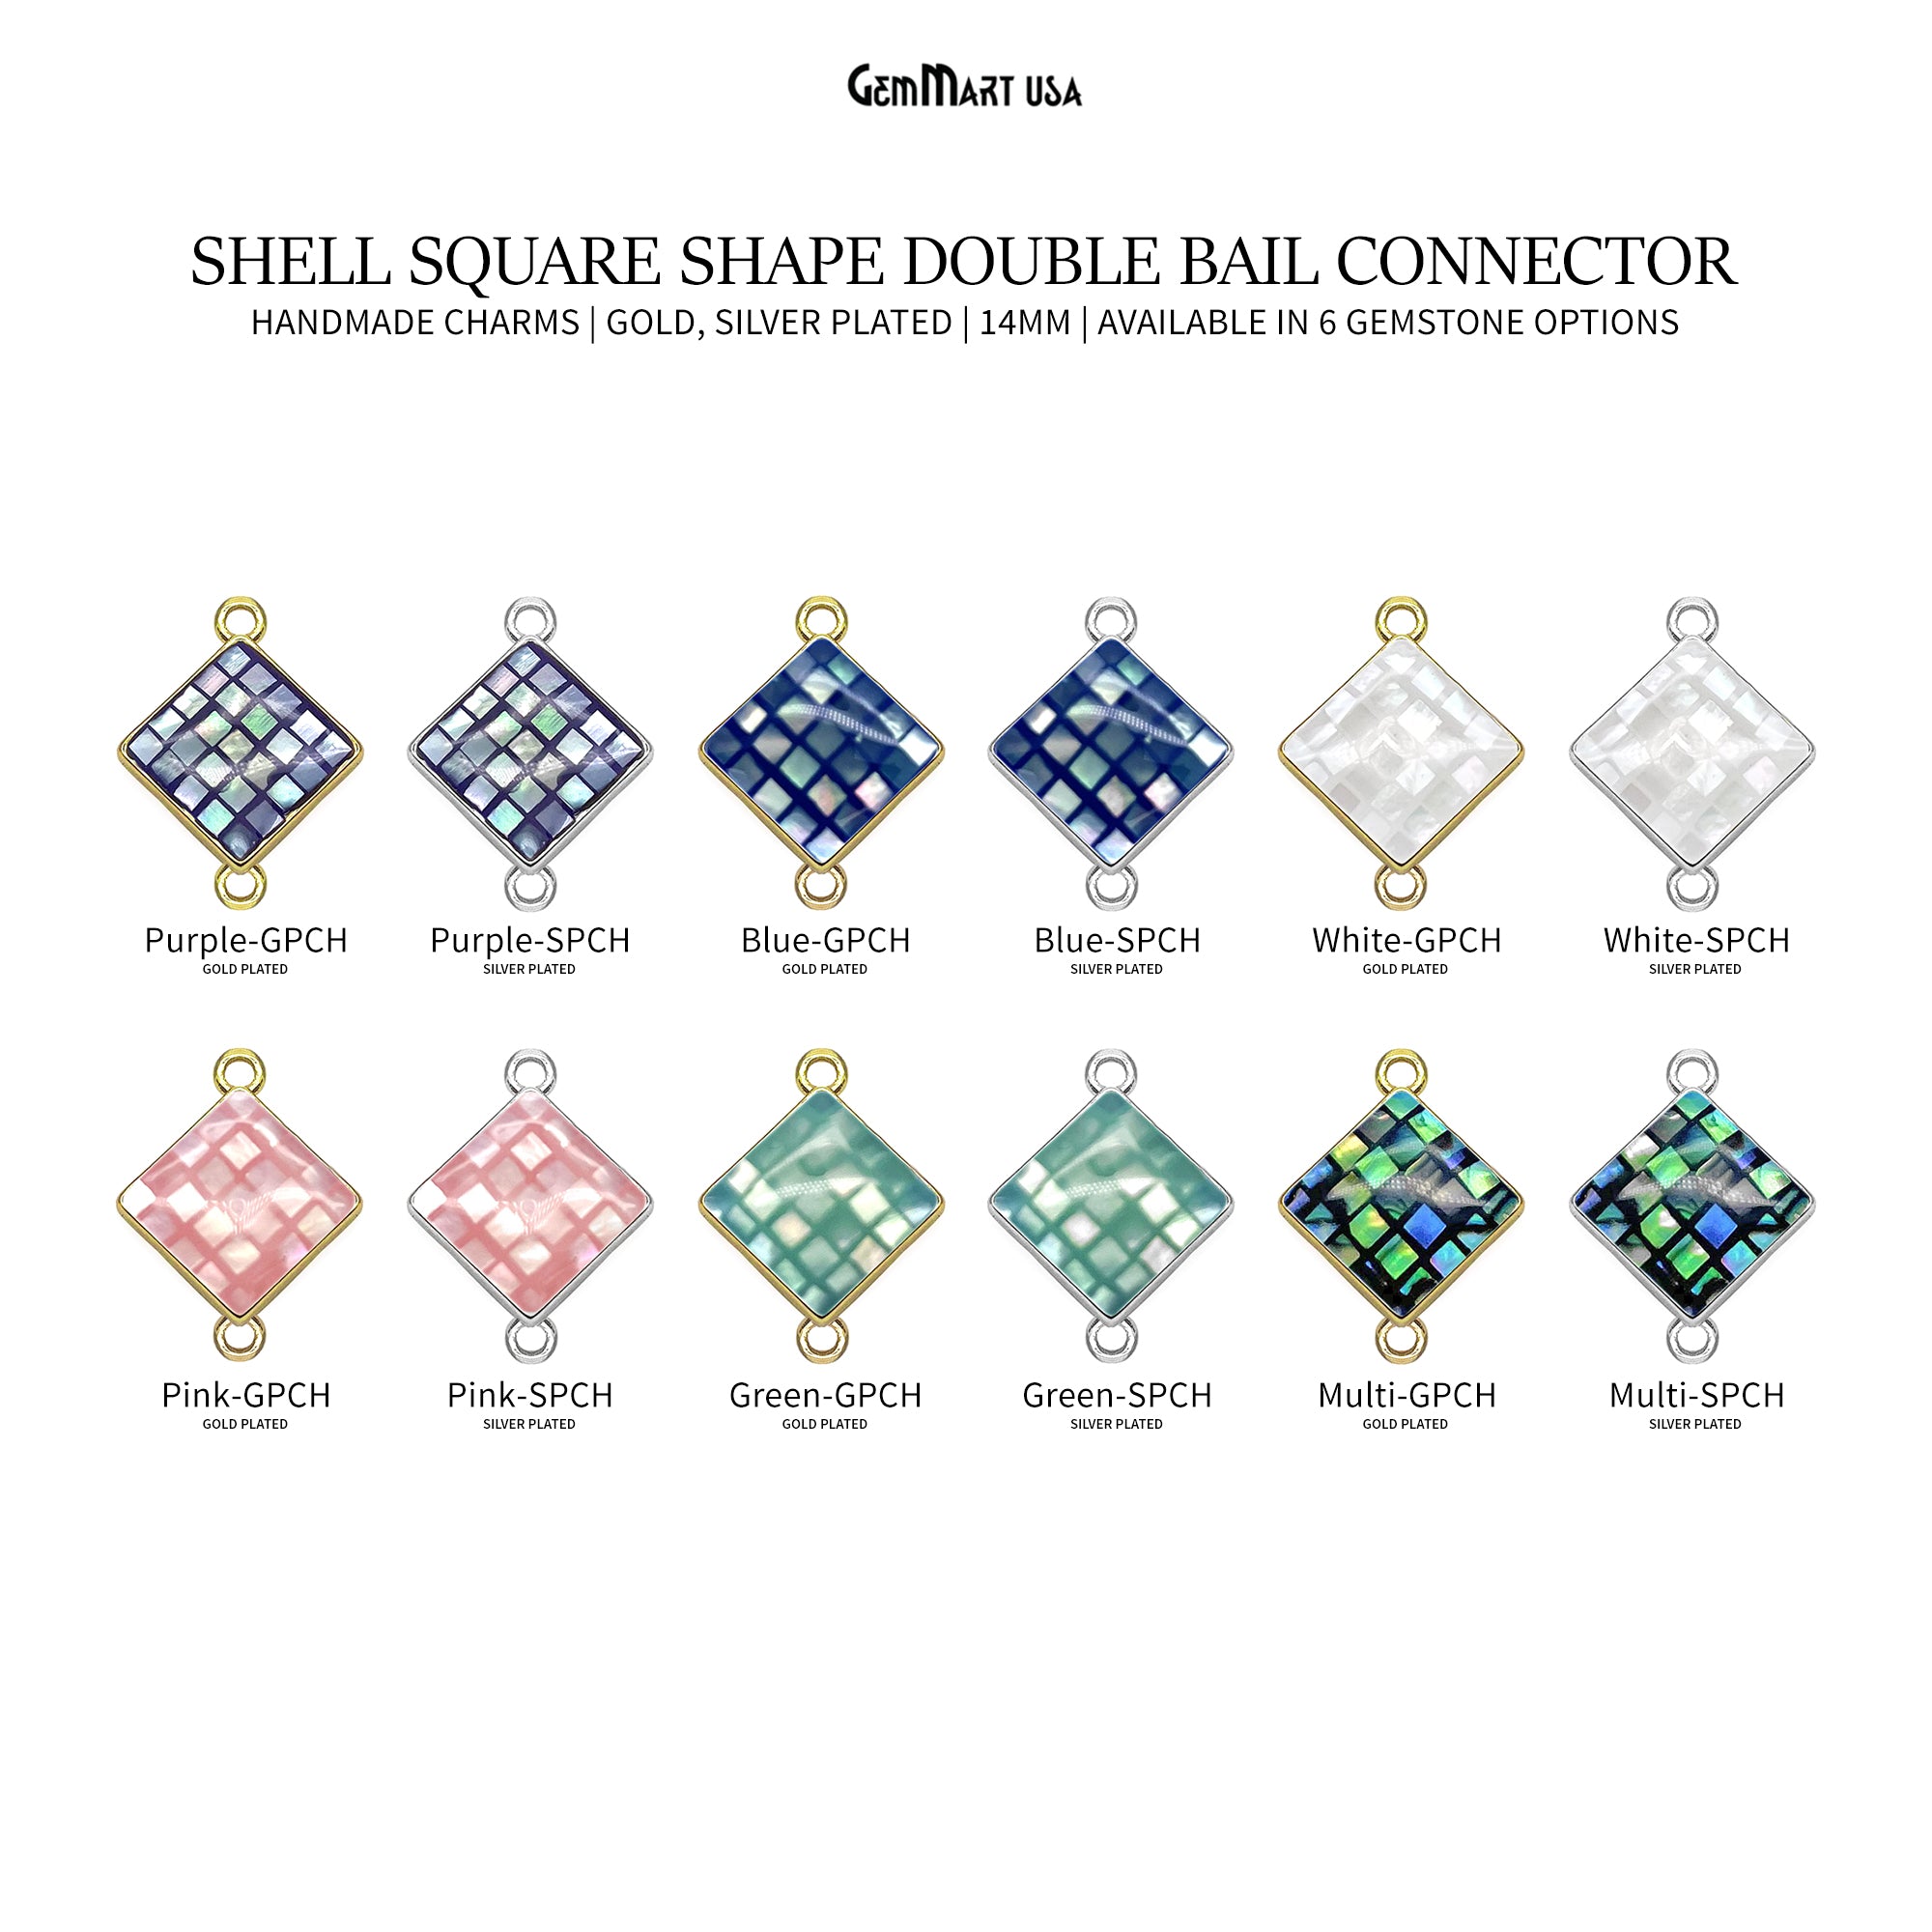 Shell Square Shape 14mm Double Bail Connector